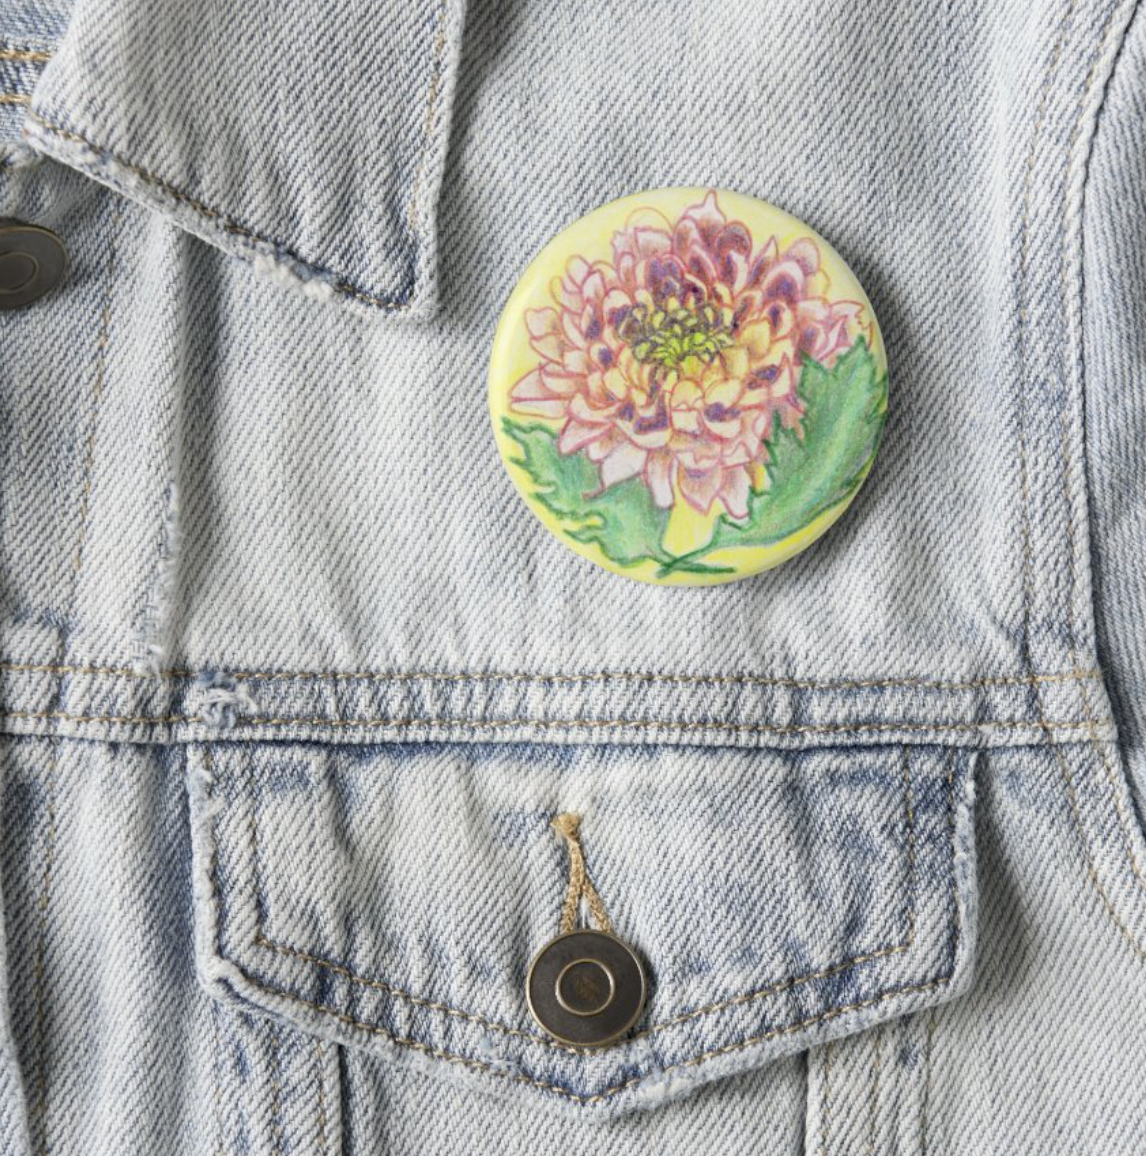 floral button on jacket